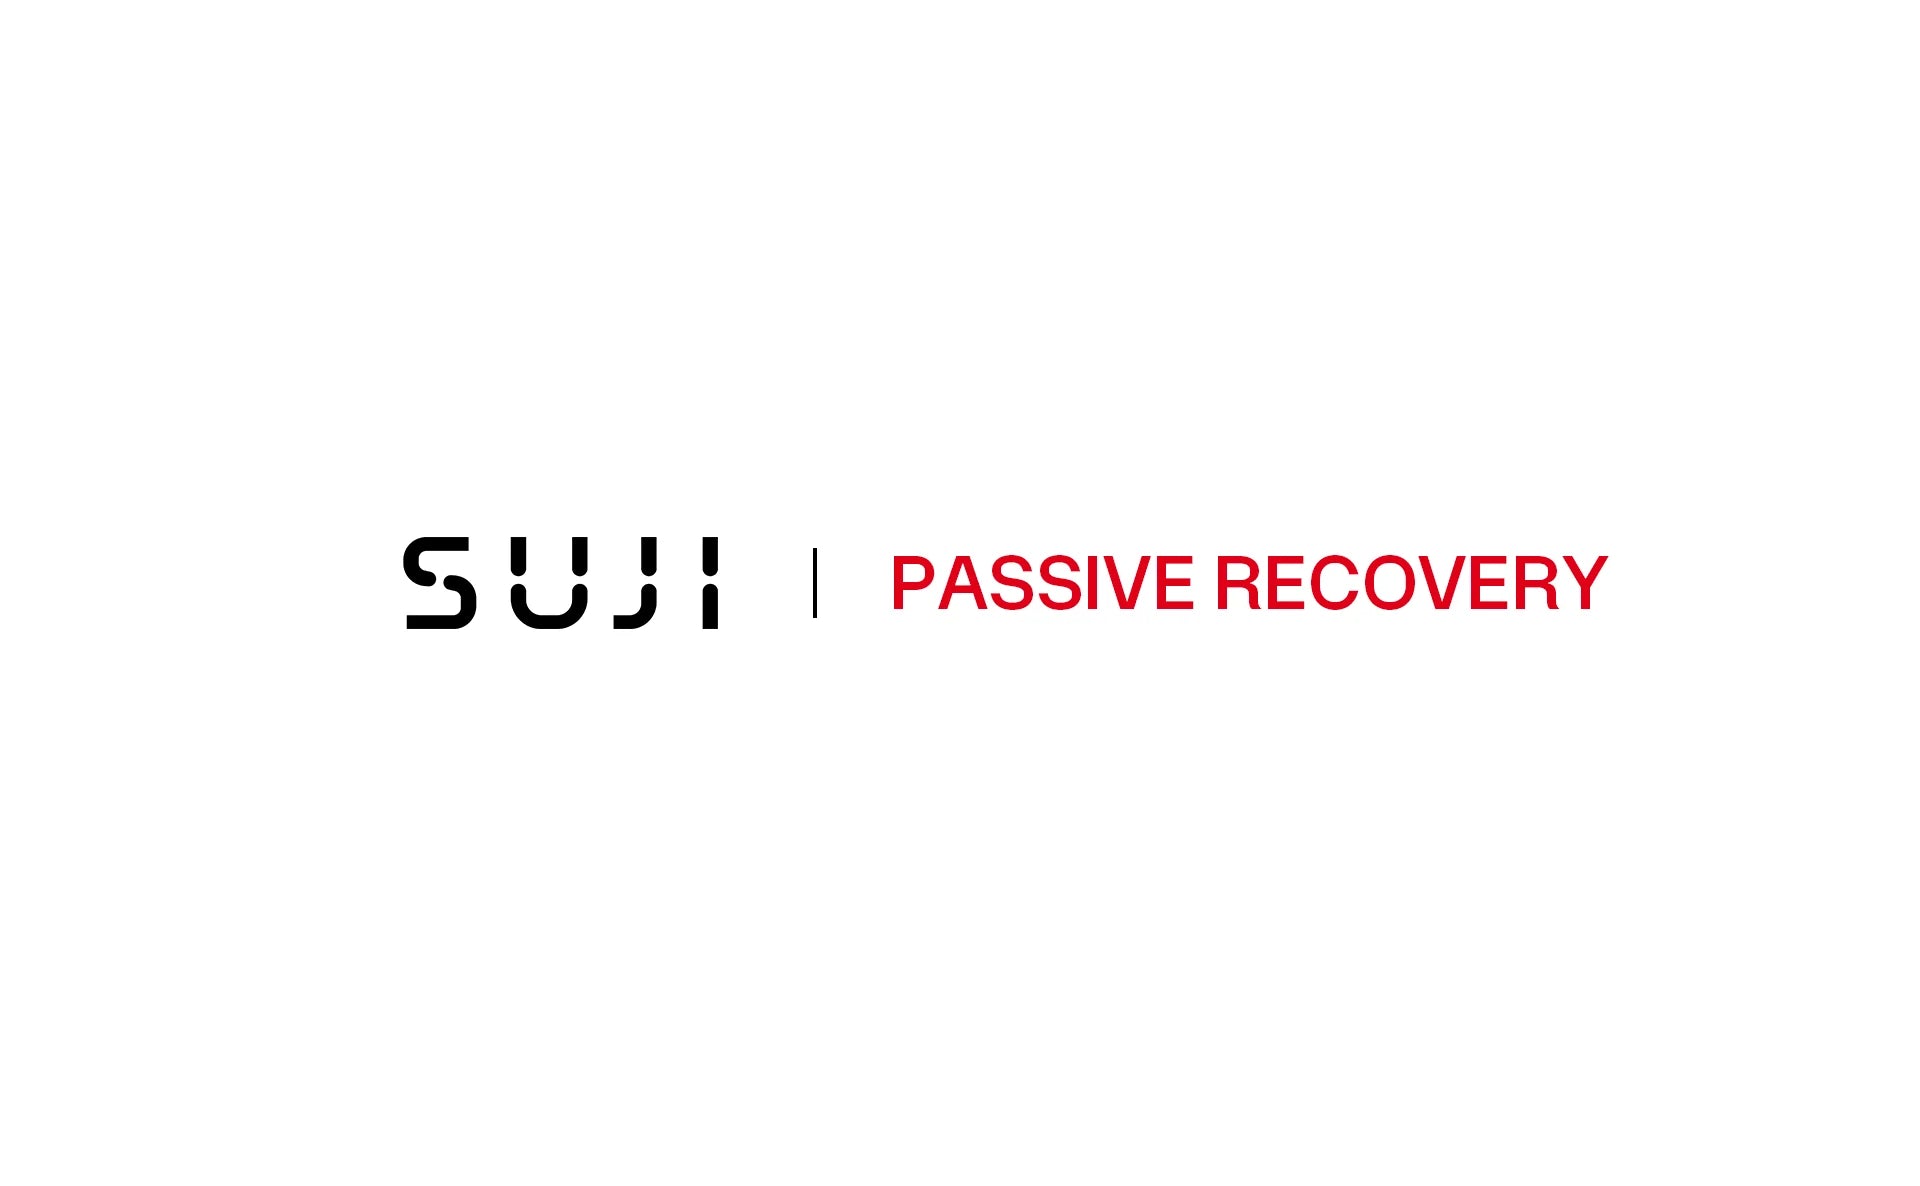 Suji for Passive Recovery